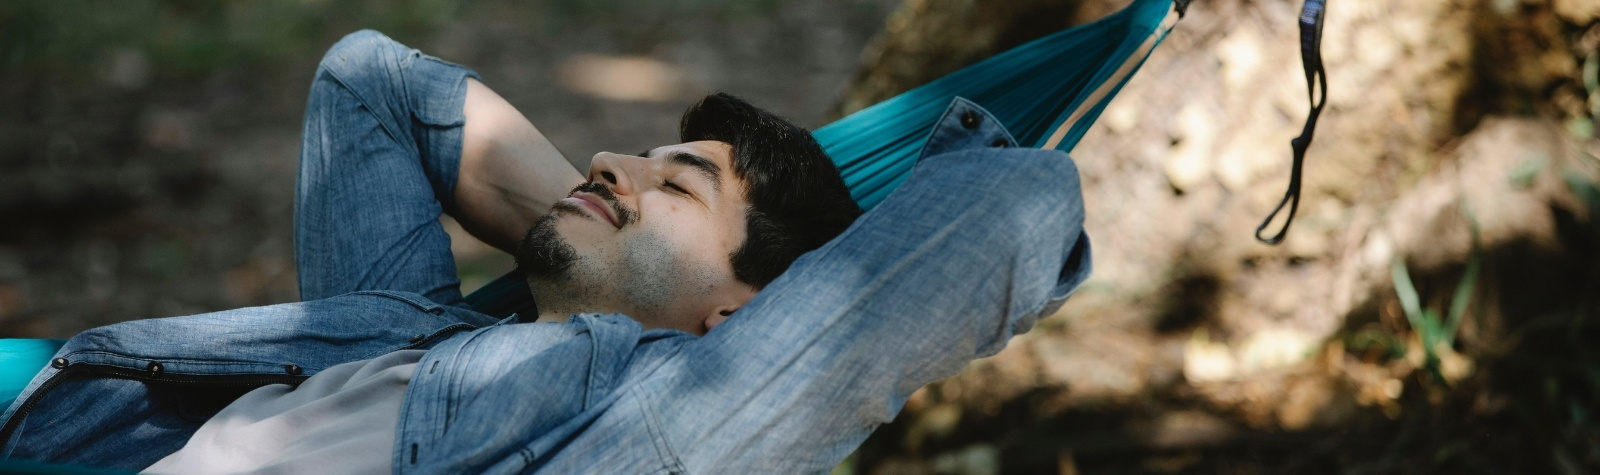 Beating the Cycle of Overwork: 5 Ways to Use Rest to Increase Productivity